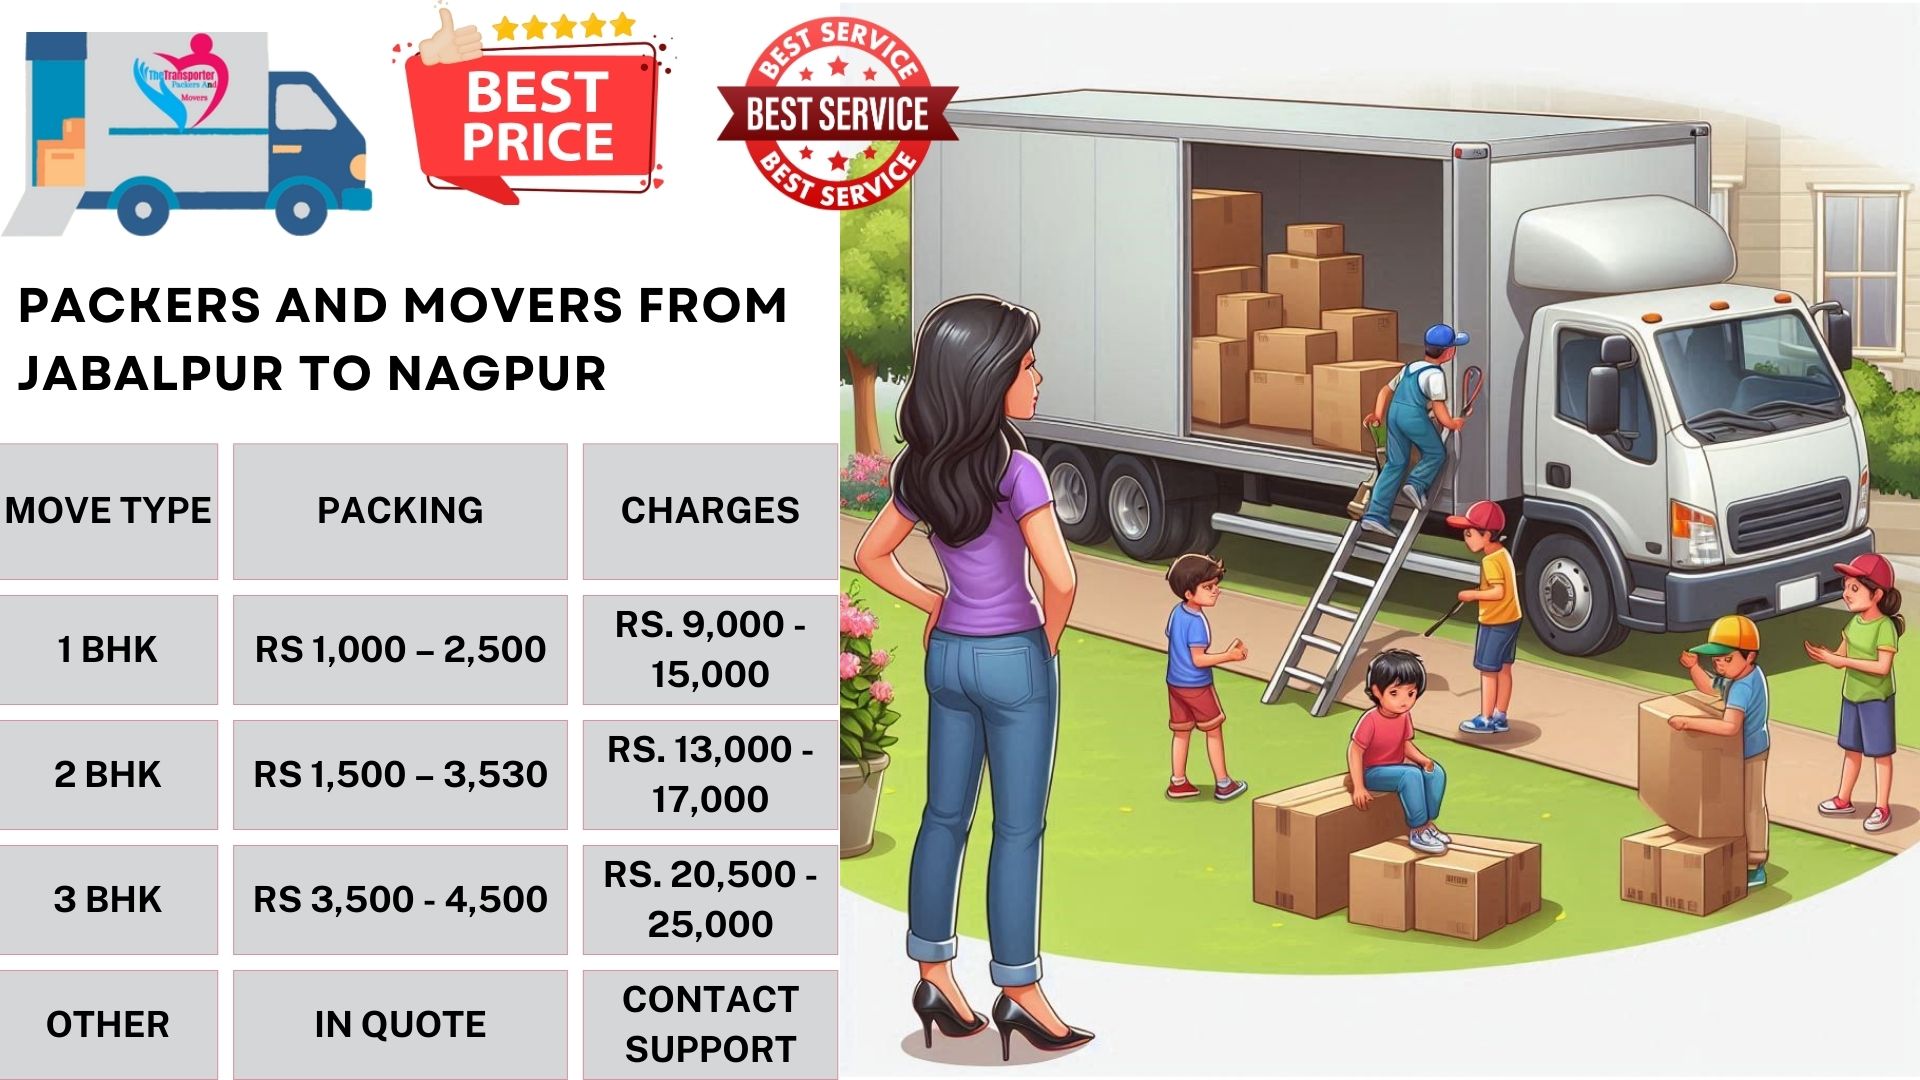 Your household goods shifting from Jabalpur to Nagpur